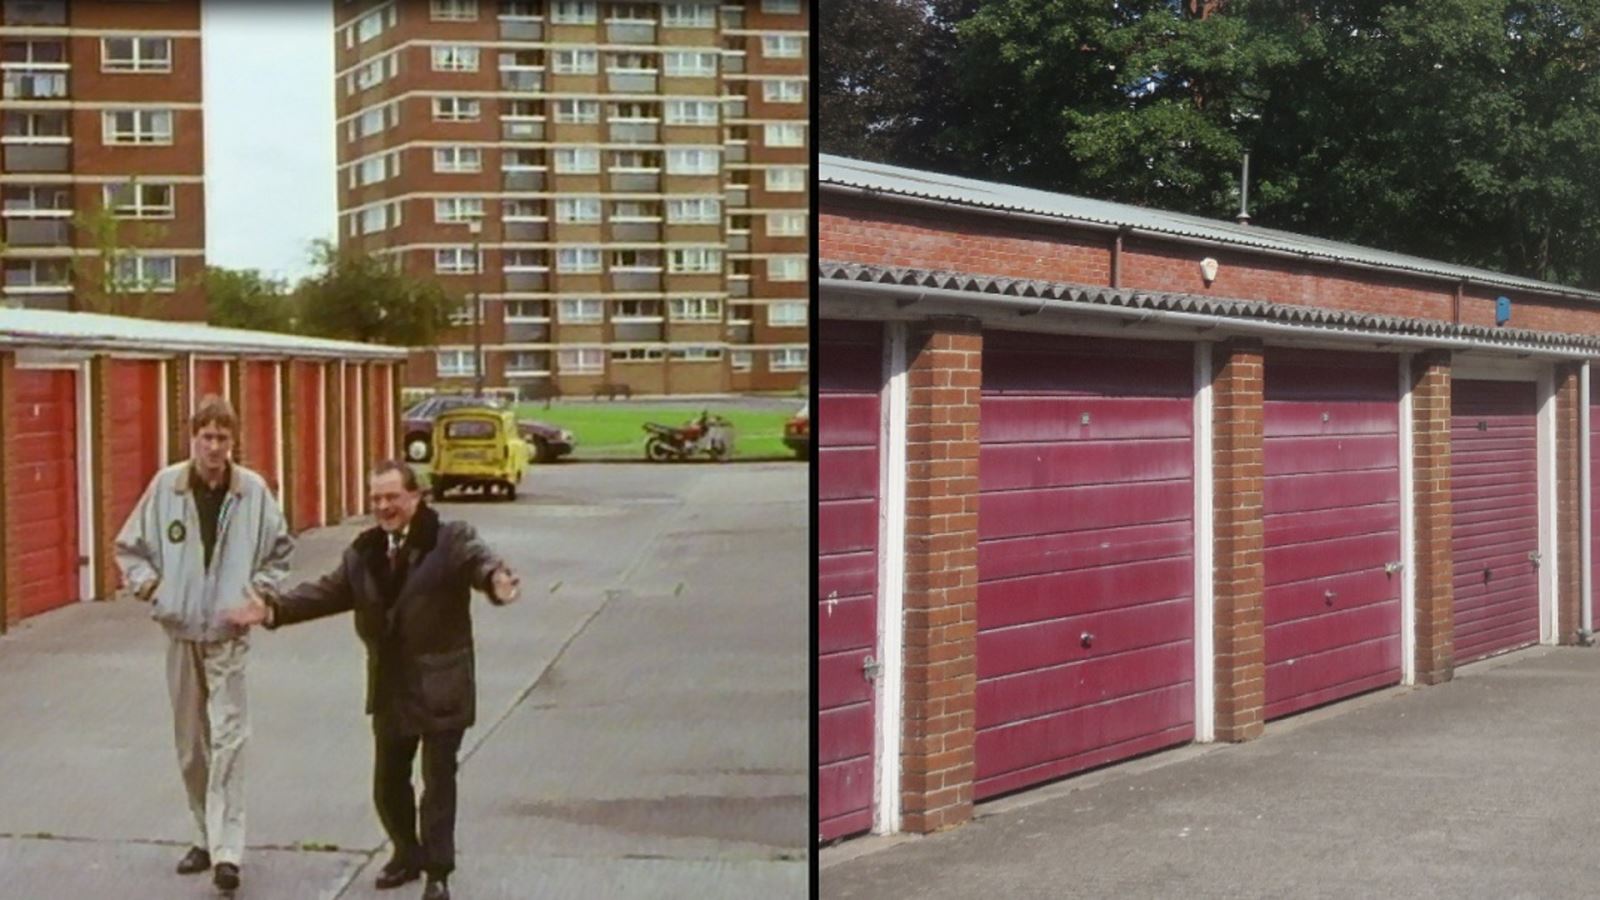 Garages on Duckmoor Road. Source Only Fools & Horses locations then and now, Flickr